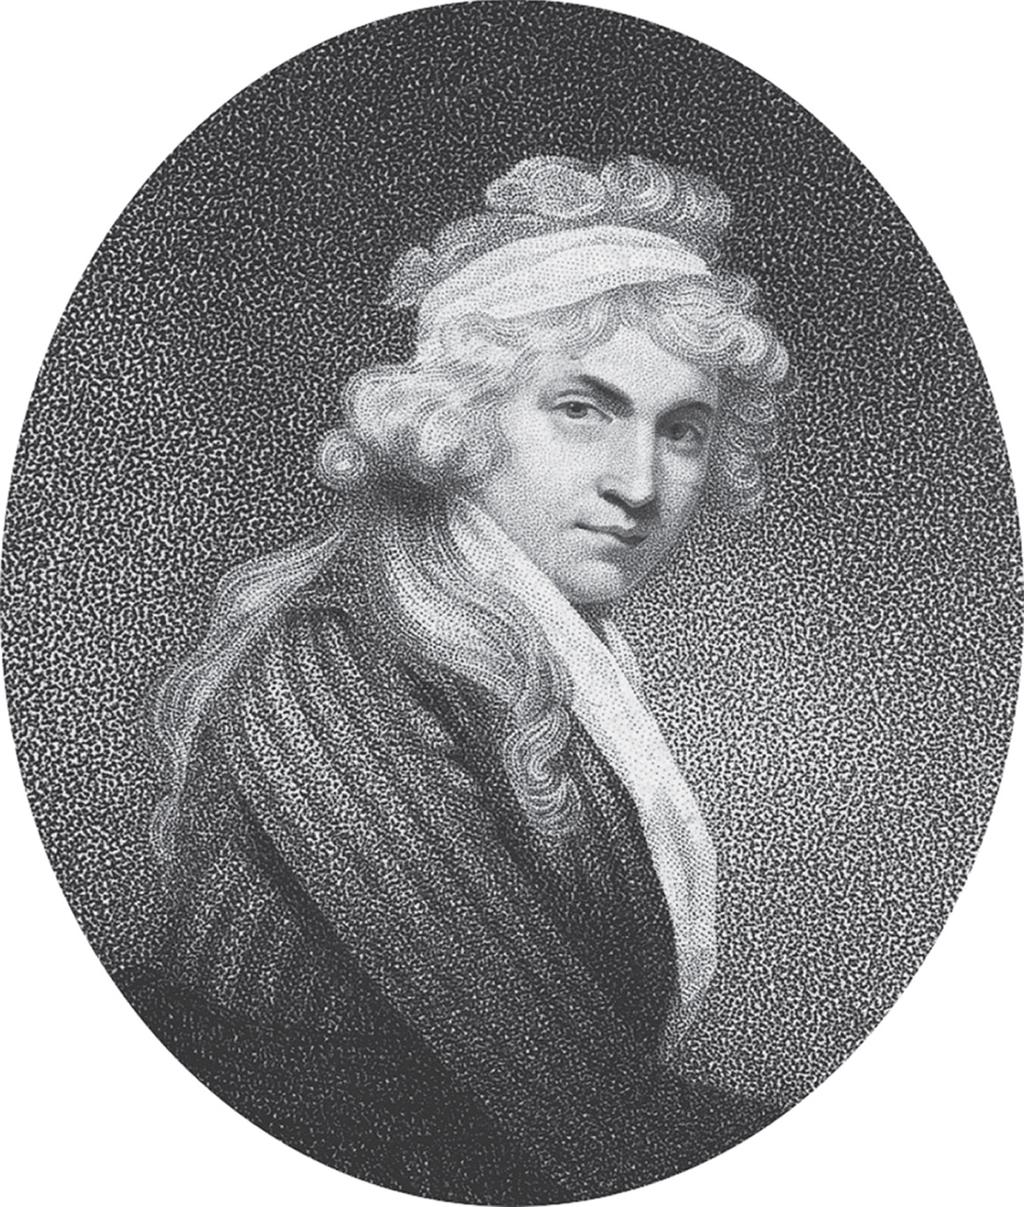 Mary Wollstonecraft in her A Vindication of the Rights of Woman defended equality of women